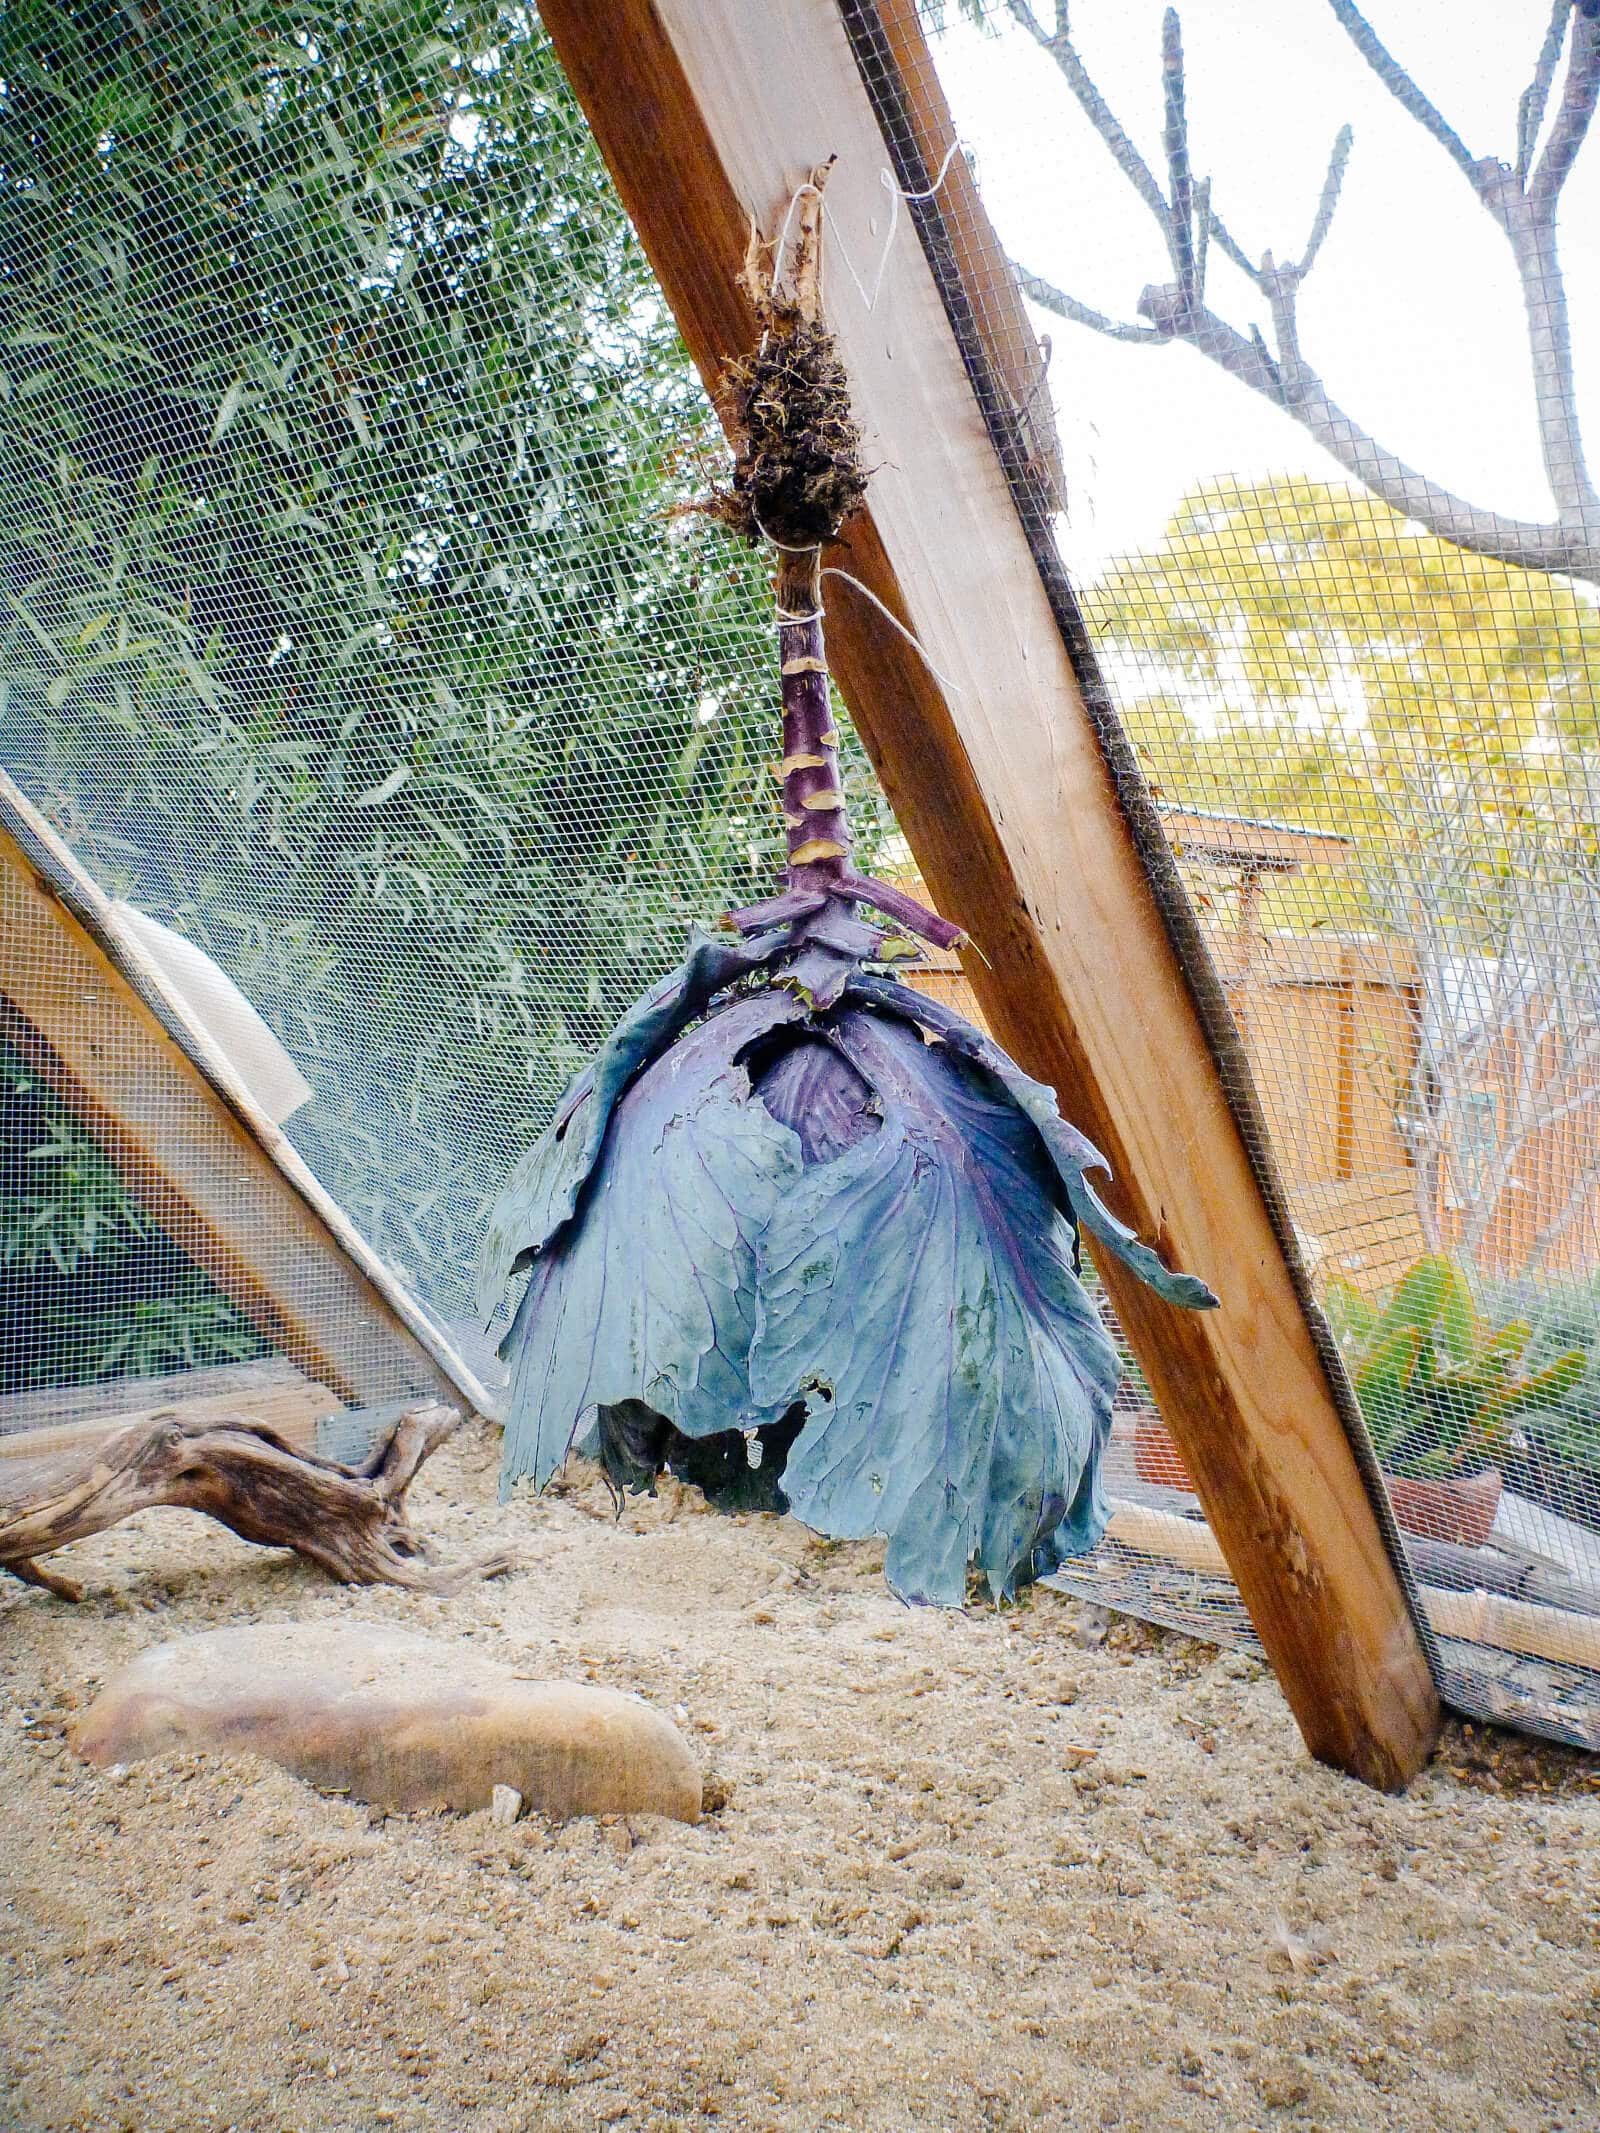 Hang a cabbage pinata to help your hens beat winter boredom